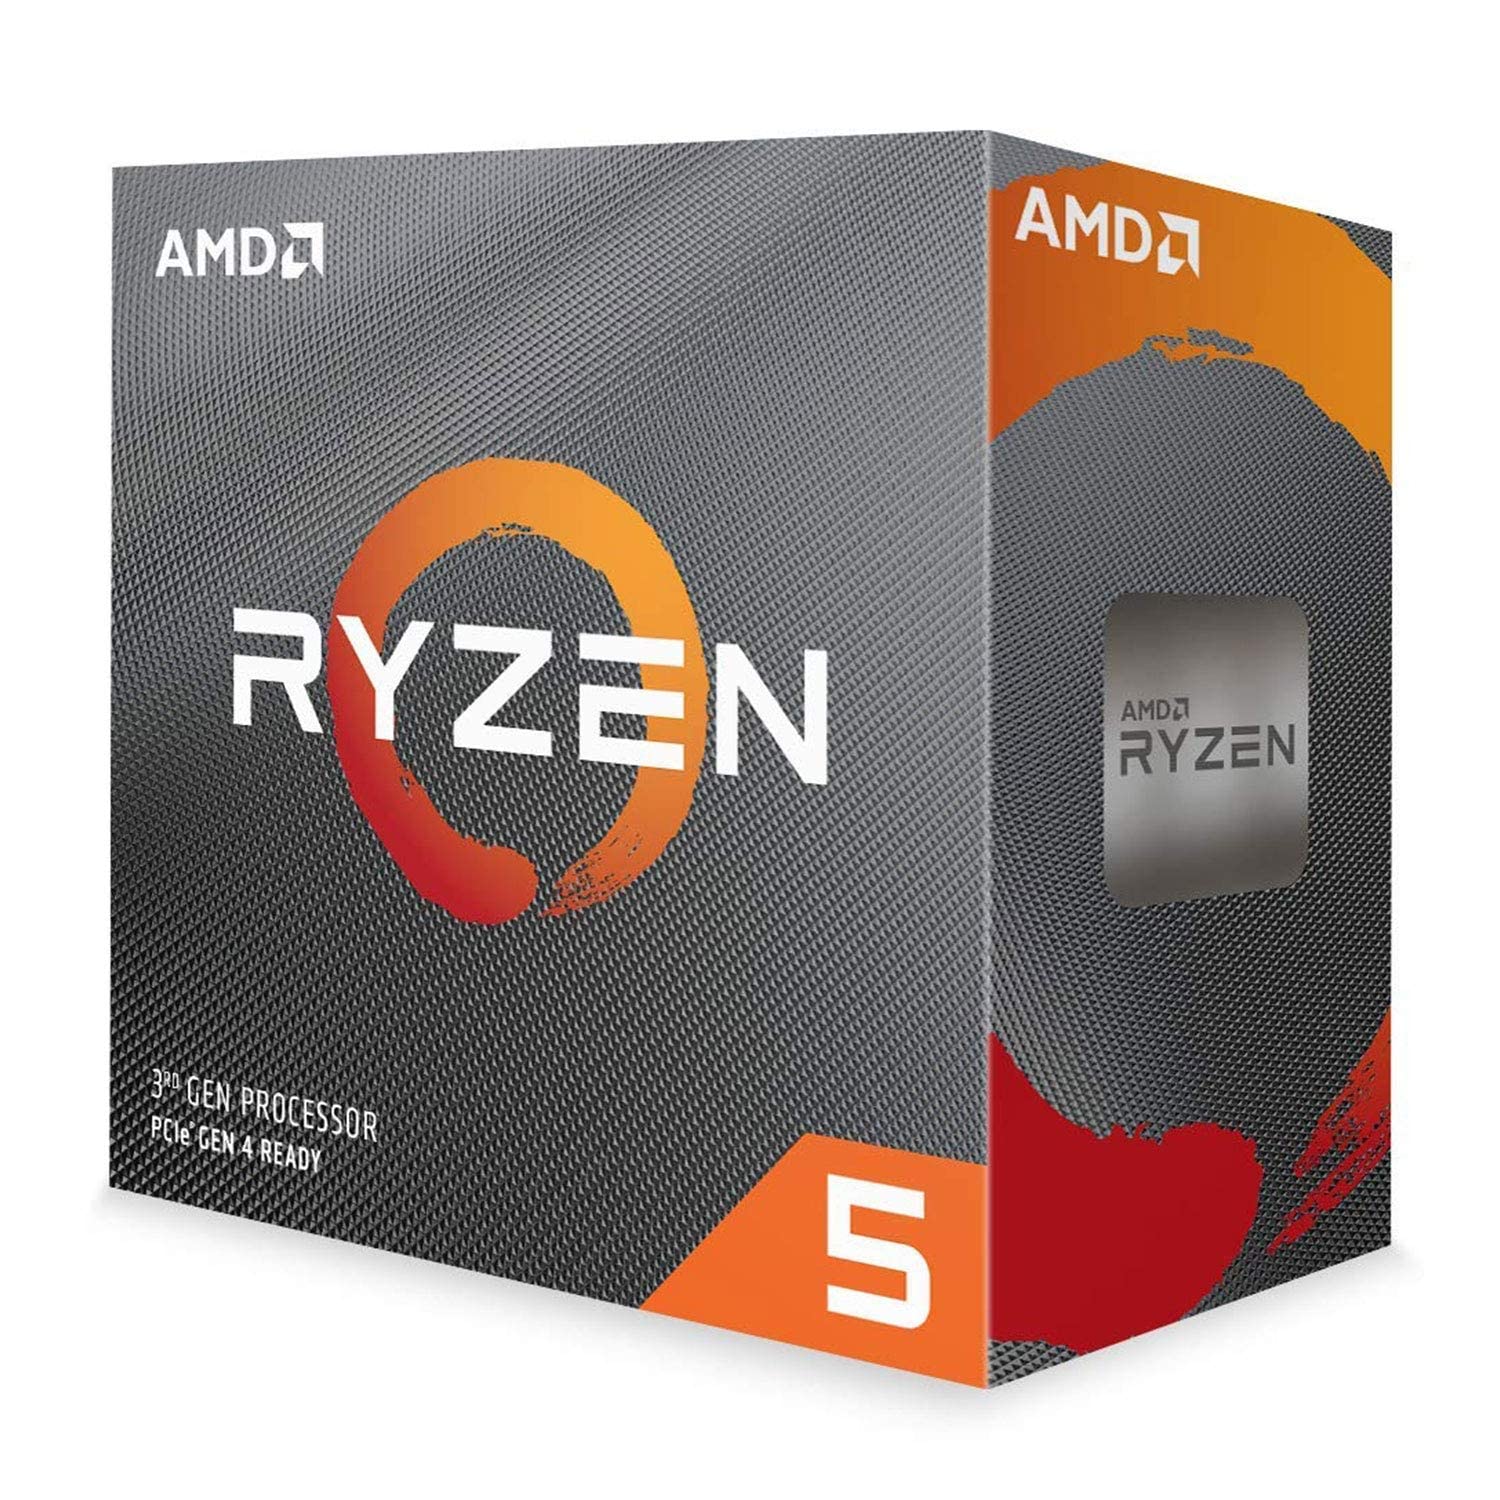 You are currently viewing Comparing AMD Ryzen 5 5600 vs 5600X